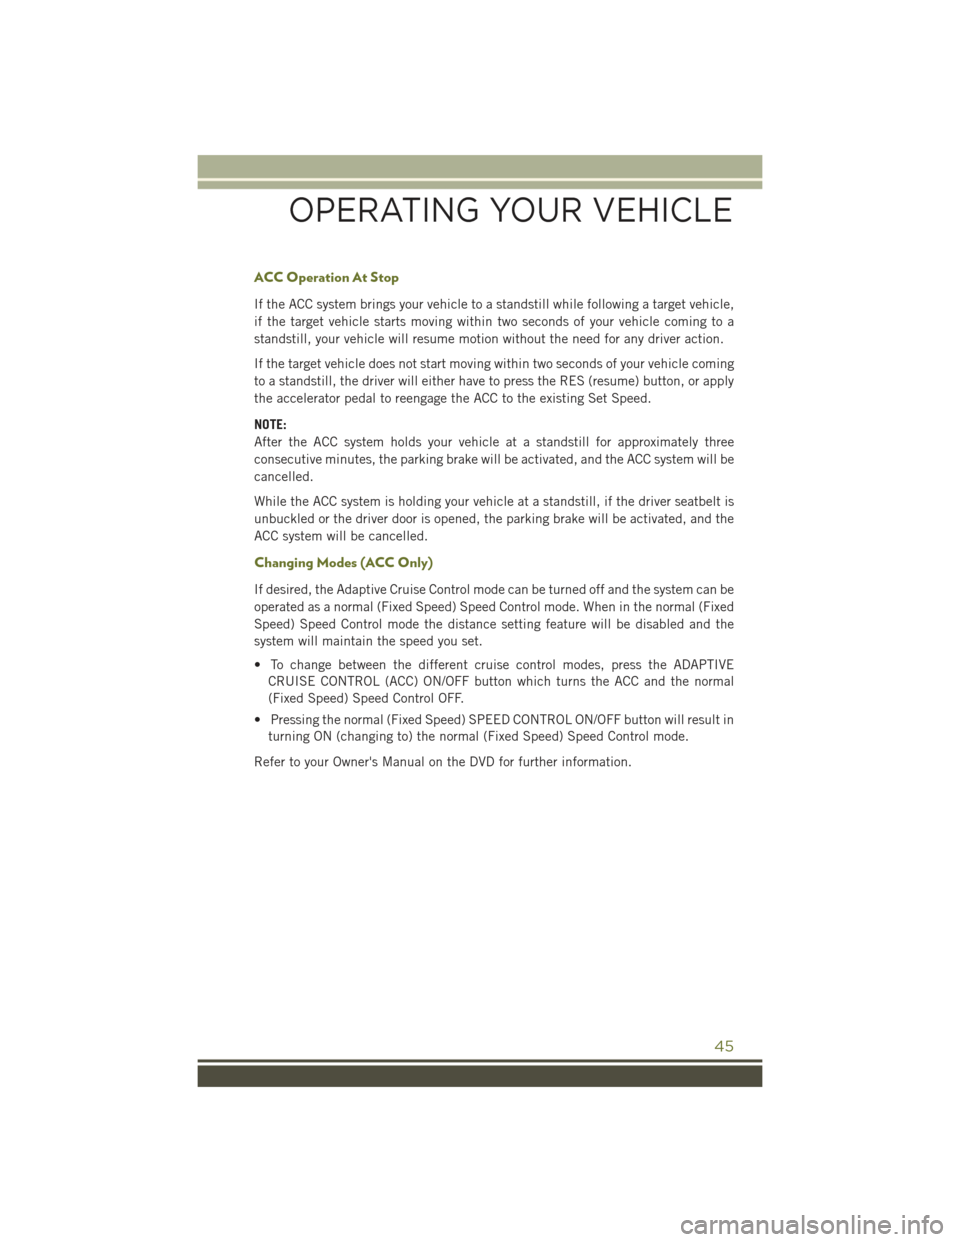 JEEP CHEROKEE 2015 KL / 5.G User Guide ACC Operation At Stop
If the ACC system brings your vehicle to a standstill while following a target vehicle,
if the target vehicle starts moving within two seconds of your vehicle coming to a
standst